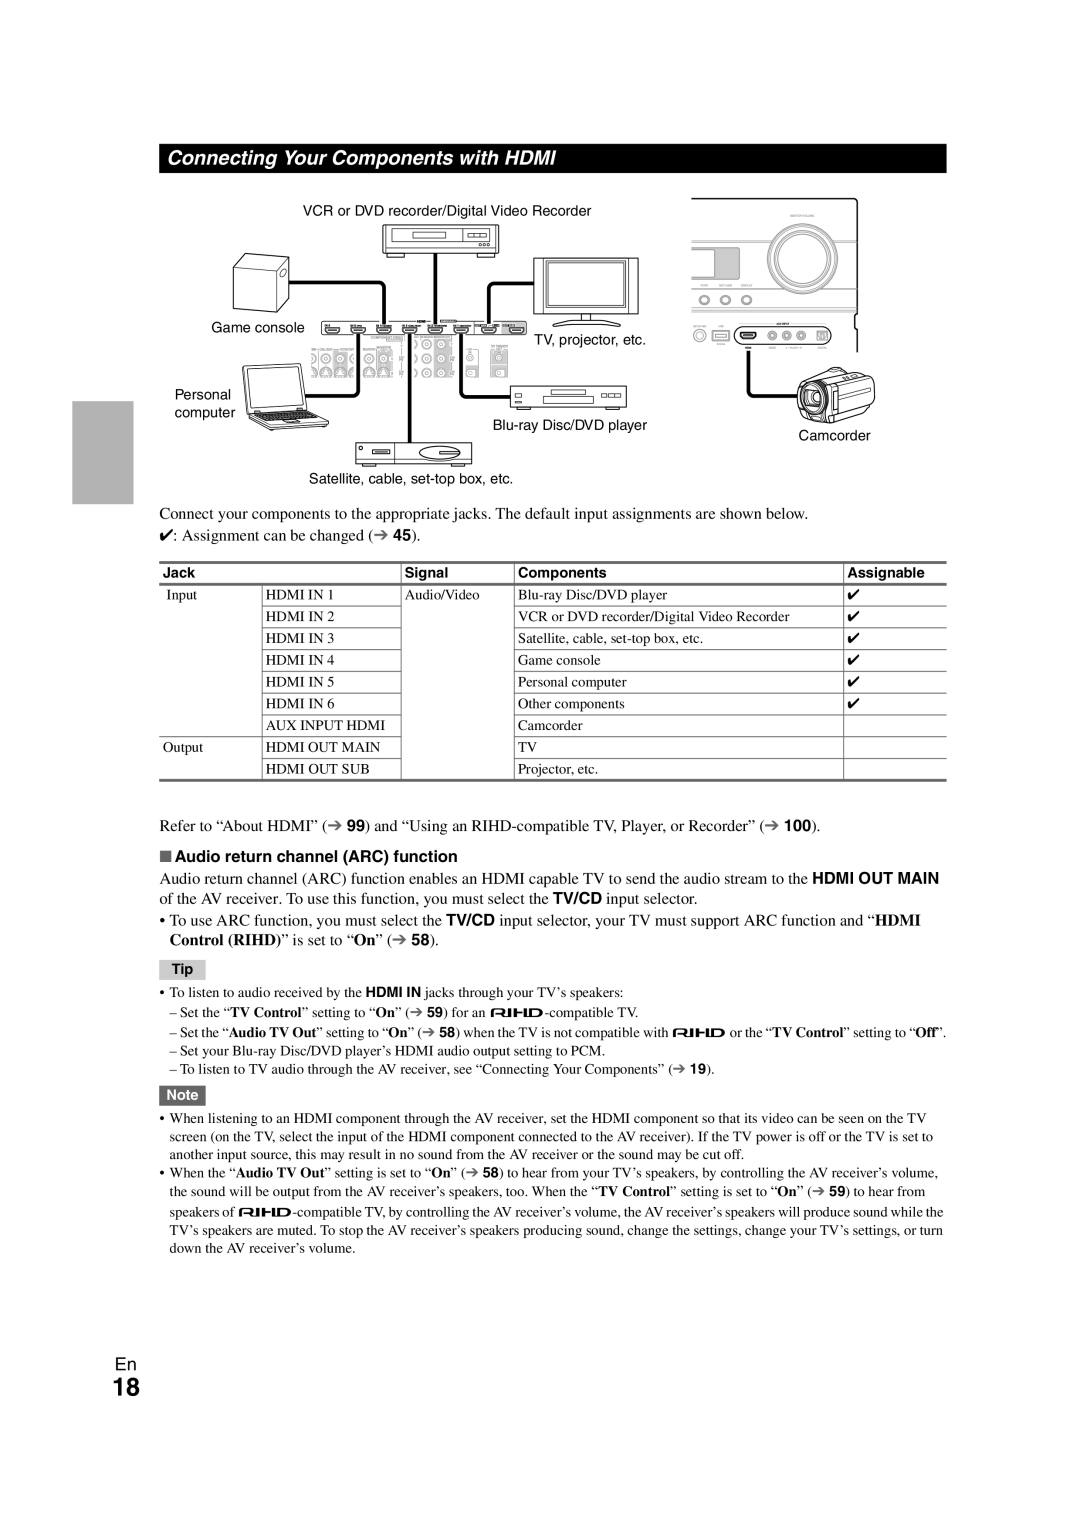 Onkyo TX-NR1008 instruction manual Connecting Your Components with HDMI, Audio return channel ARC function 